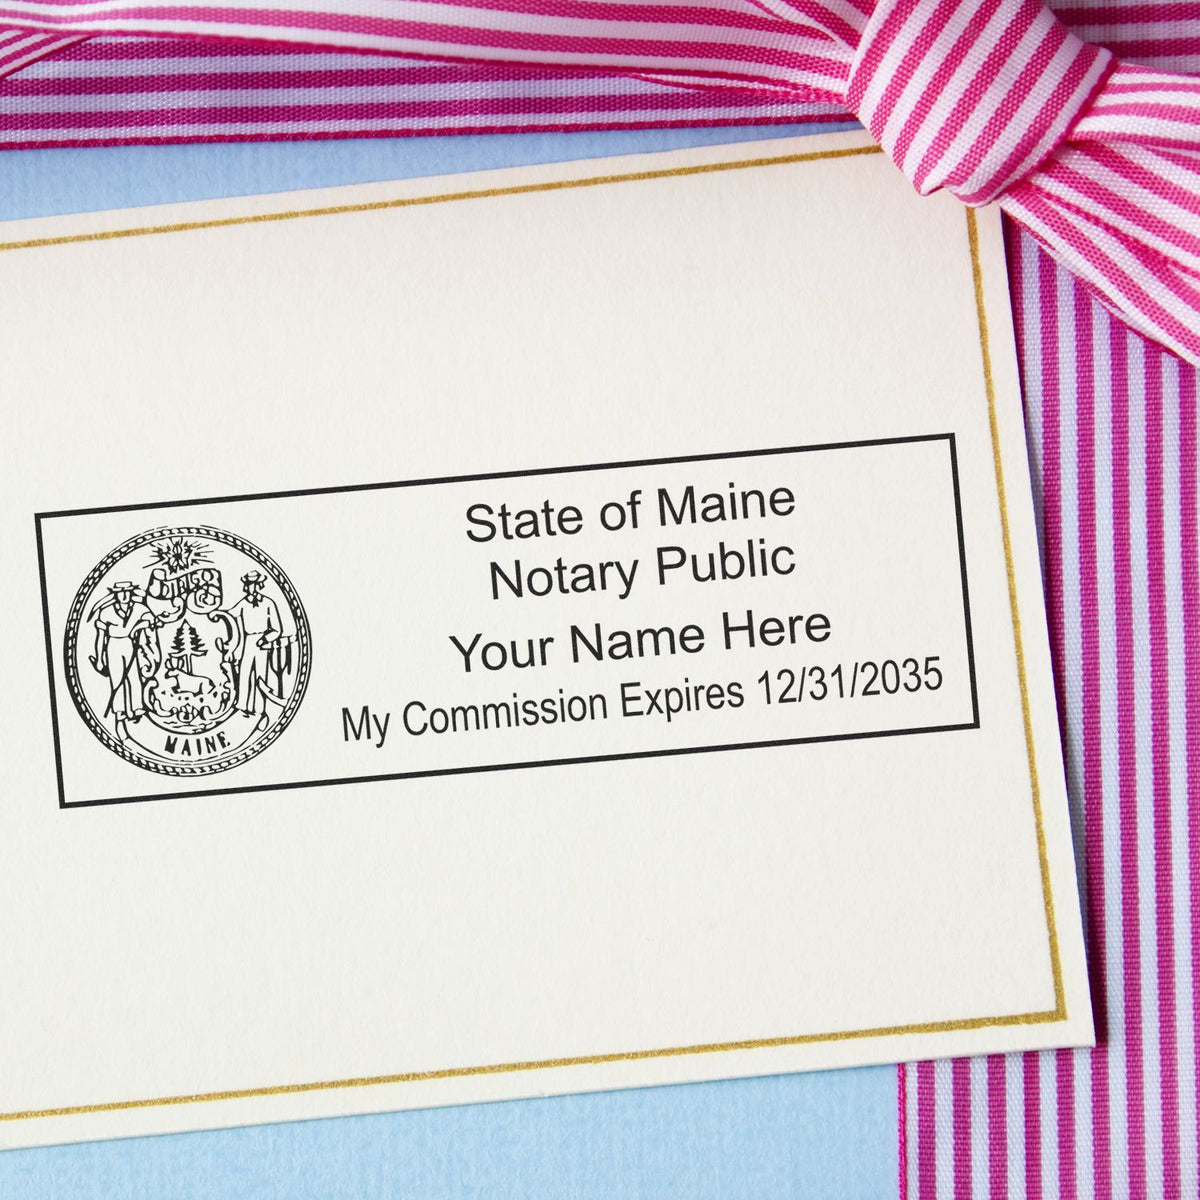 An alternative view of the PSI Maine Notary Stamp stamped on a sheet of paper showing the image in use